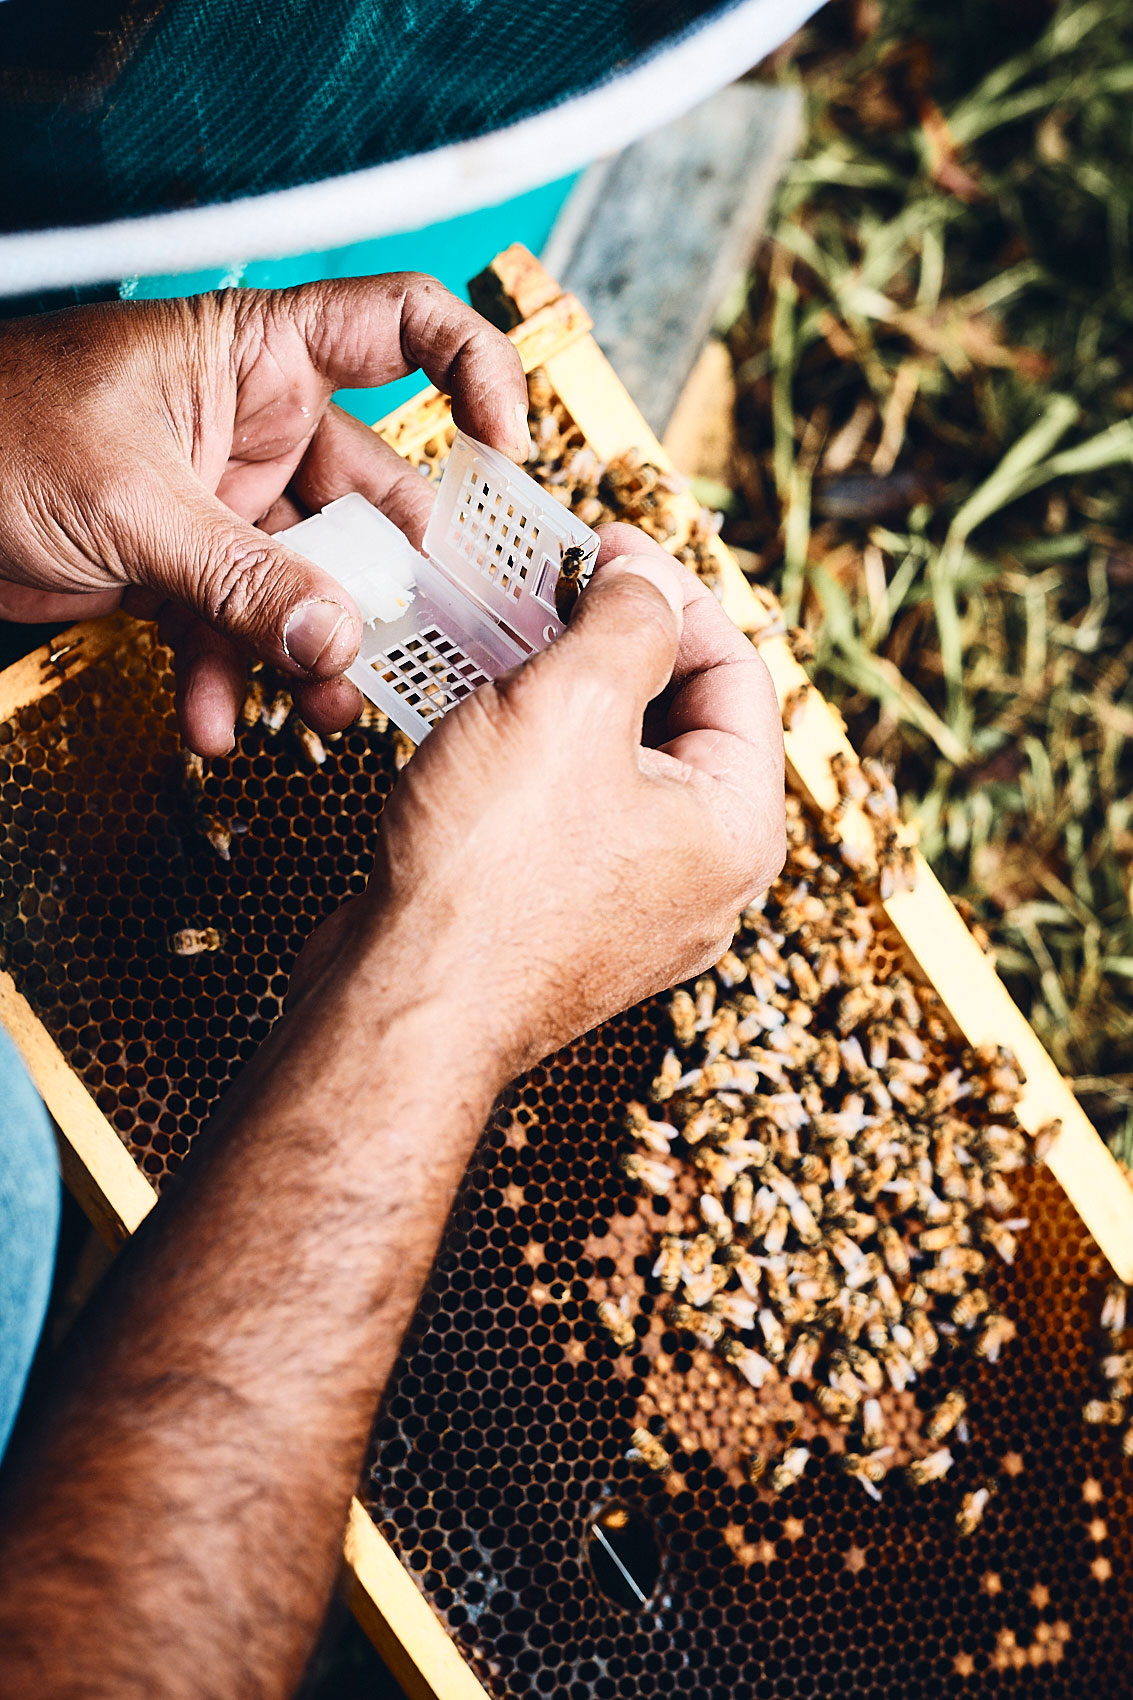 Our Beehive • Keeping New Zealand Honeybees in Box • Lifestyle & Documentary Food Photography